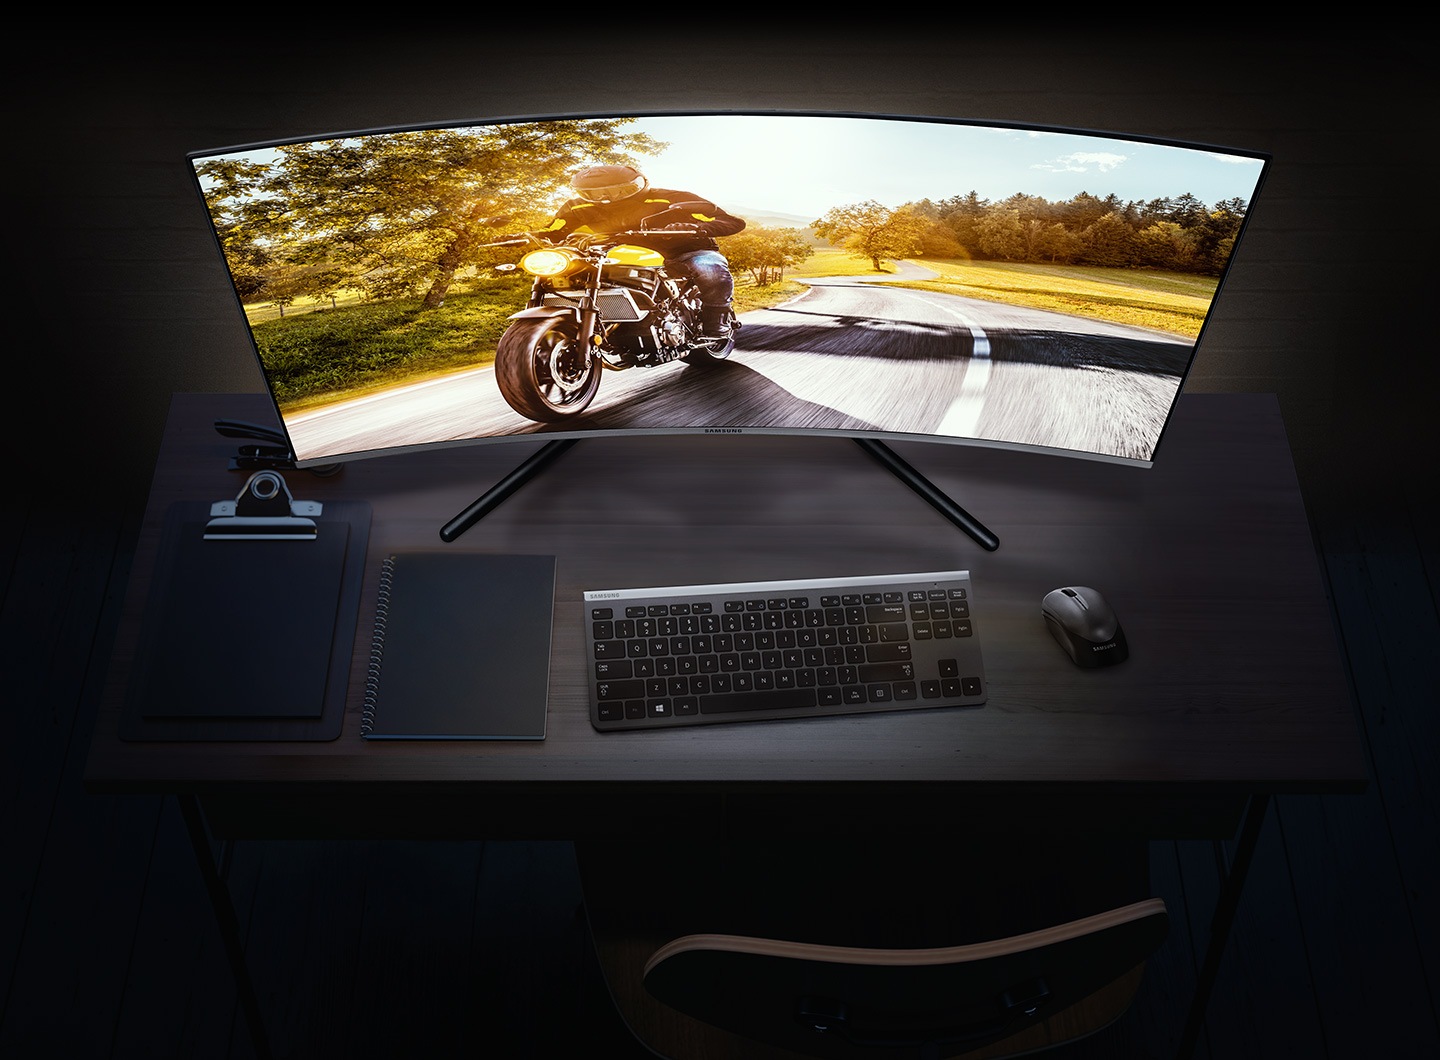 32 inch 4K monitor's 1500R screen is deeply curved for immersive viewing. 4K monitor on a desk with a man on motorbike on its curved screen